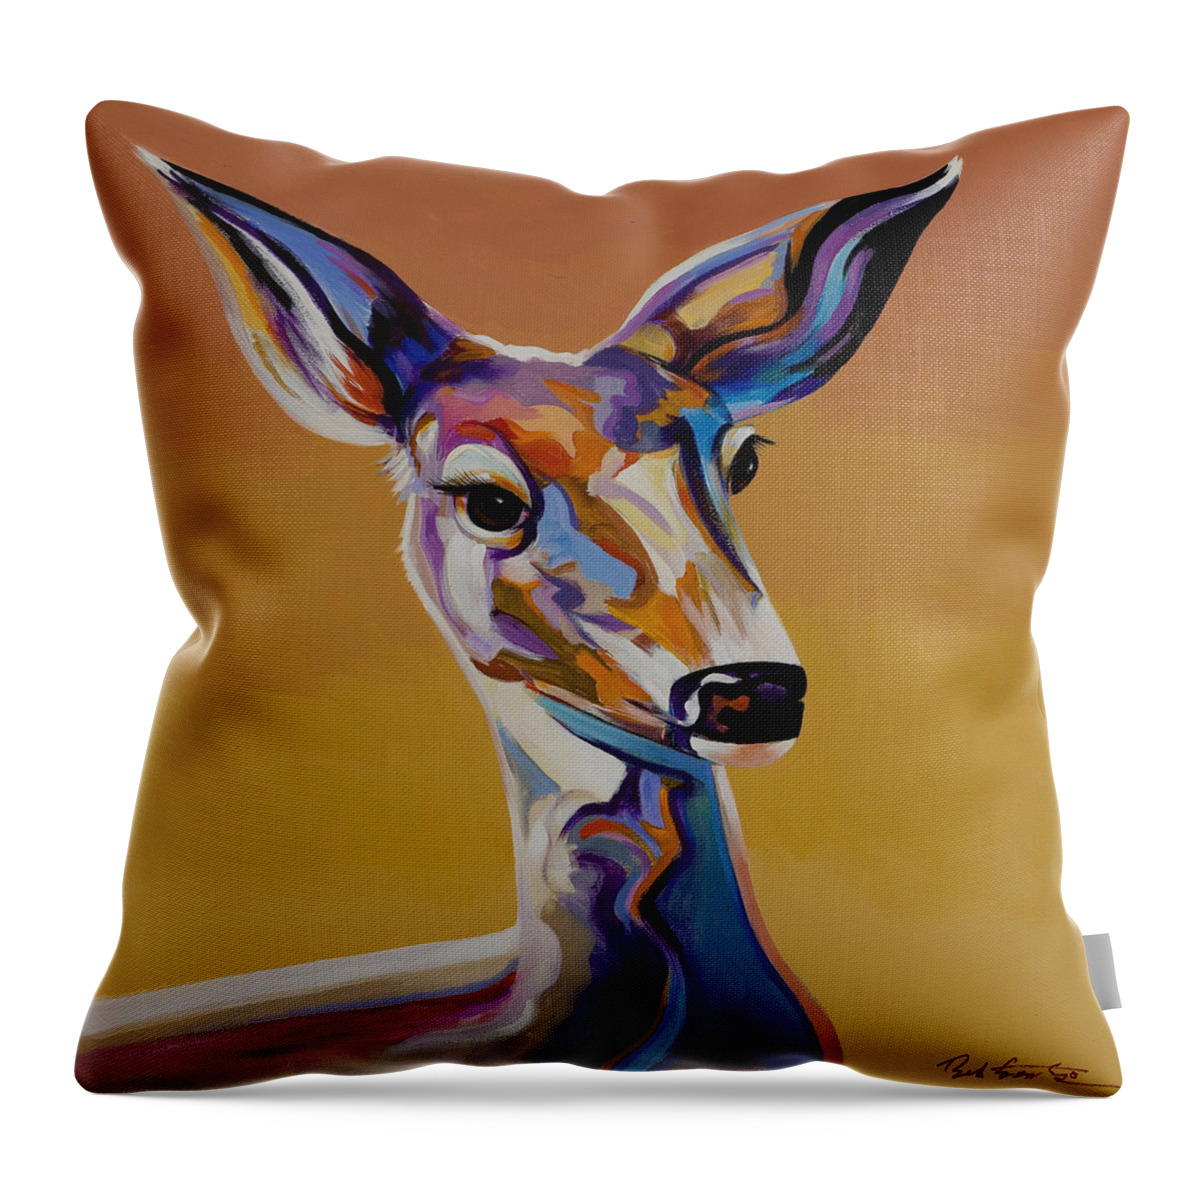 Colorful Art Throw Pillow featuring the painting Bambi by Bob Coonts